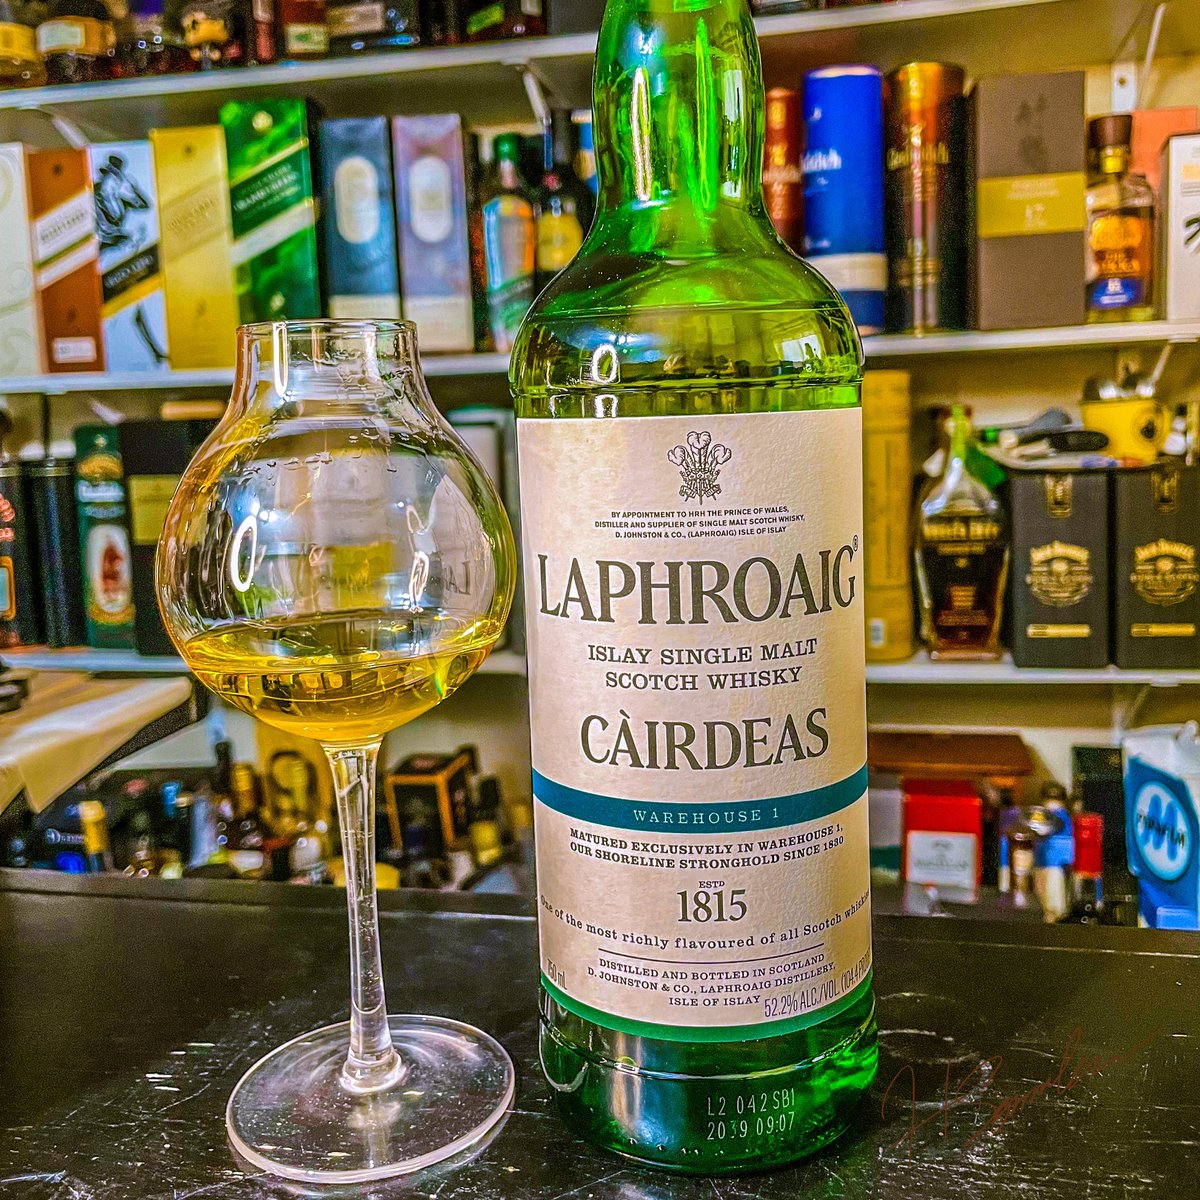 There is no age statement on this bottle but I do not care. The layers of flavors in this whisky are impressive. 
These Càirdeas Editions are making me fall back in love with @laphroaig

What is your favorite @laphroaig expression? 
#laphroaig #islay #islaywhisky #islay